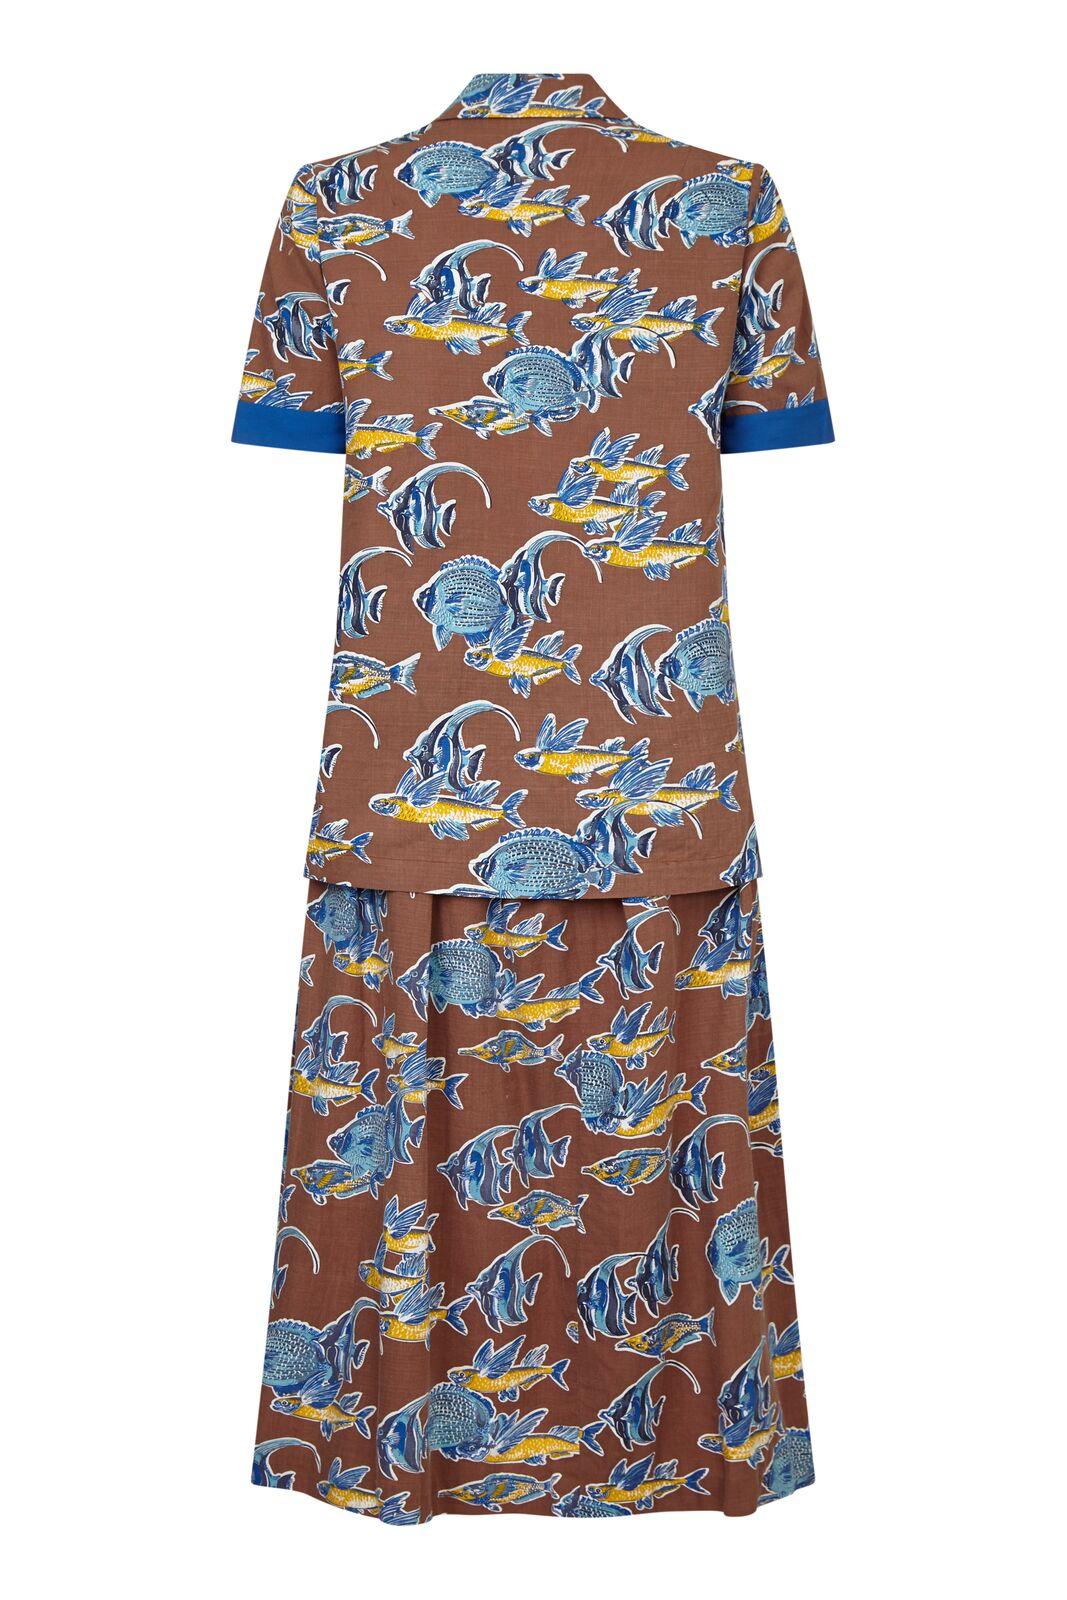 This two piece 1950s cotton skirt set by Teddy Tinling is playful and unorthodox alluding to tropicana and utility wear with pleasing results. The designer Teddy Tinling was an English tennis player, spy and author as well as a popular designer for